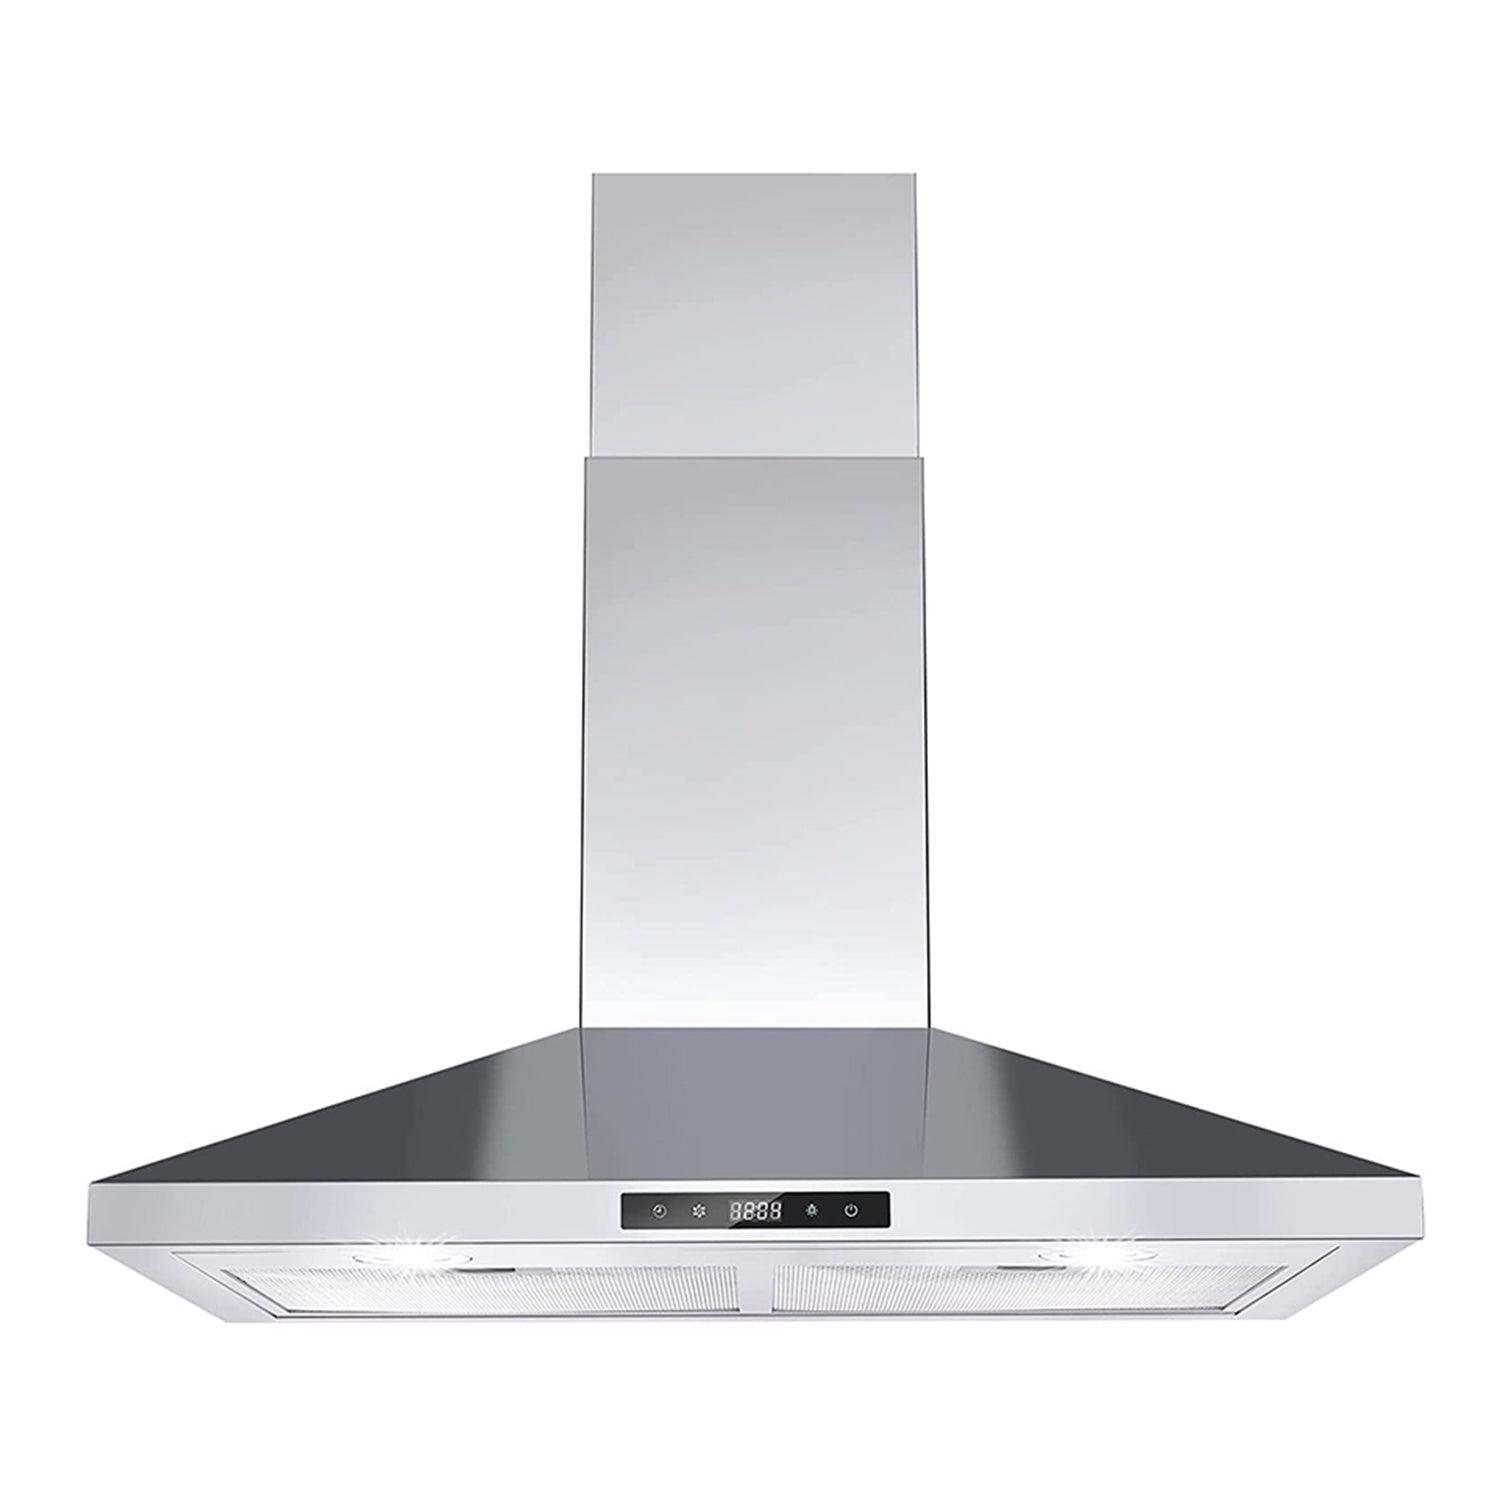 Tieasy Range Hood 30 inch Wall Mount Range Hood 450 CFM Vent Touch Control Aluminum Filters - Usys 0375A